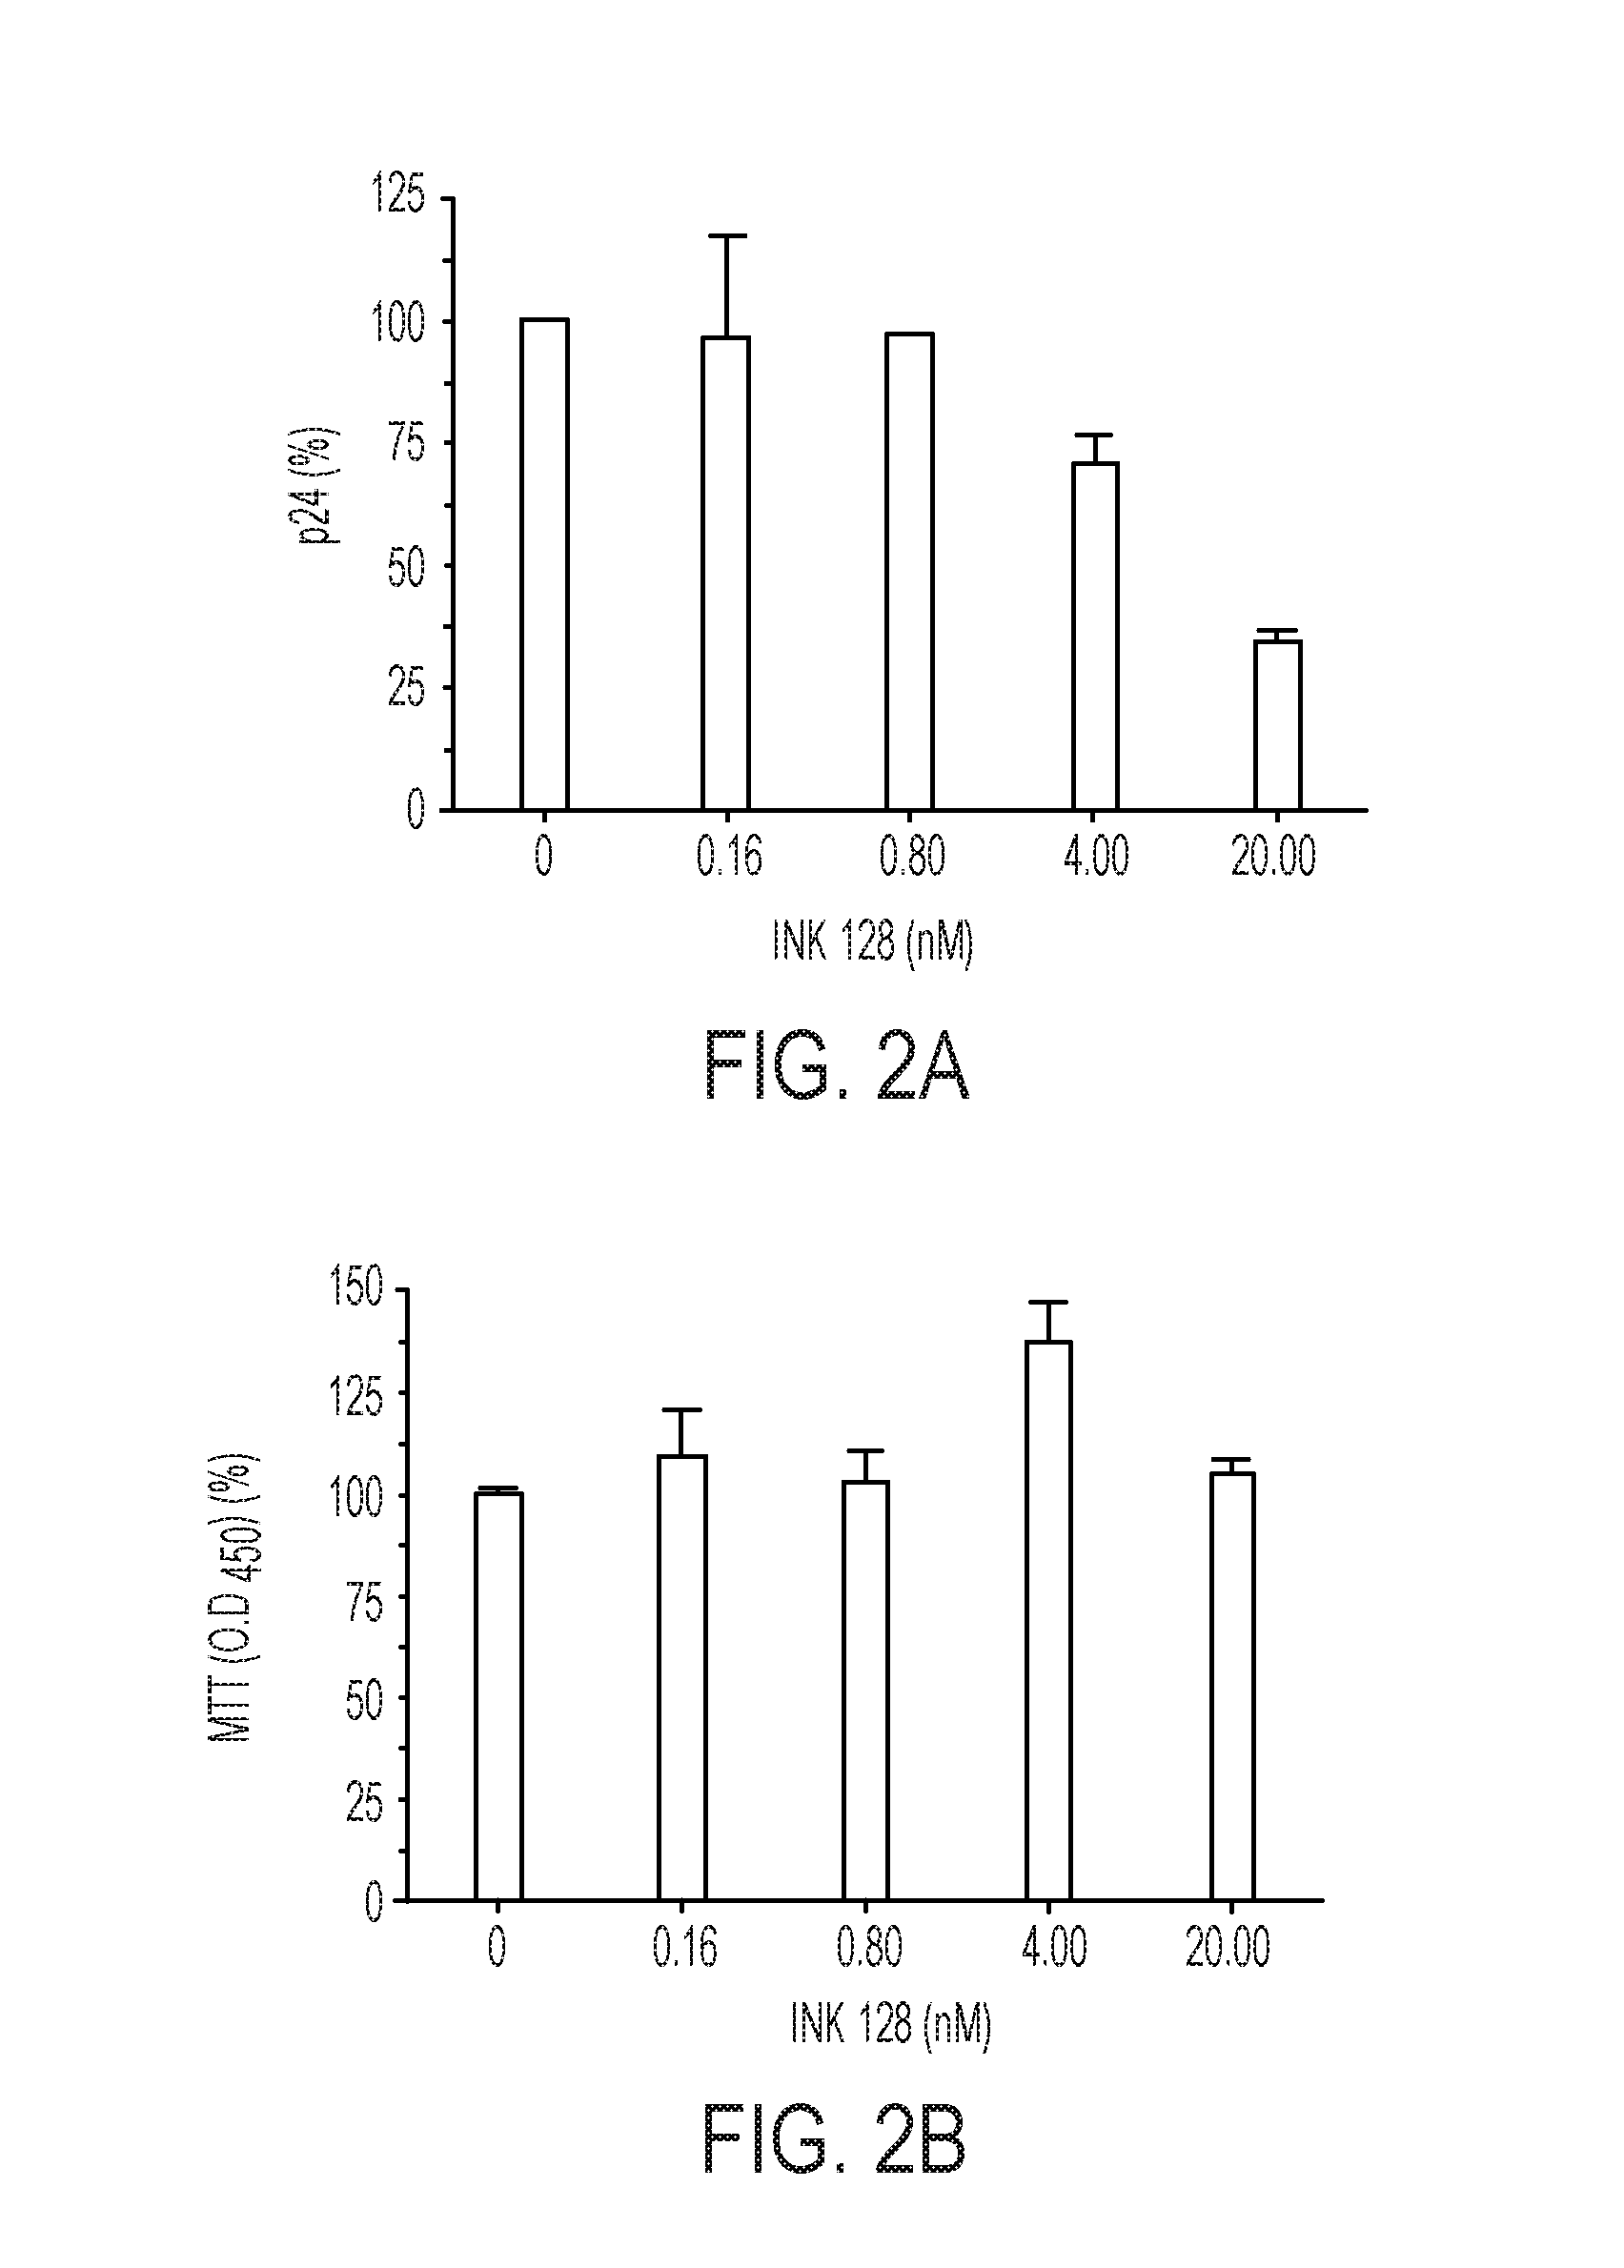 Treatment agents for inhibiting HIV and cancer in HIV infected patients